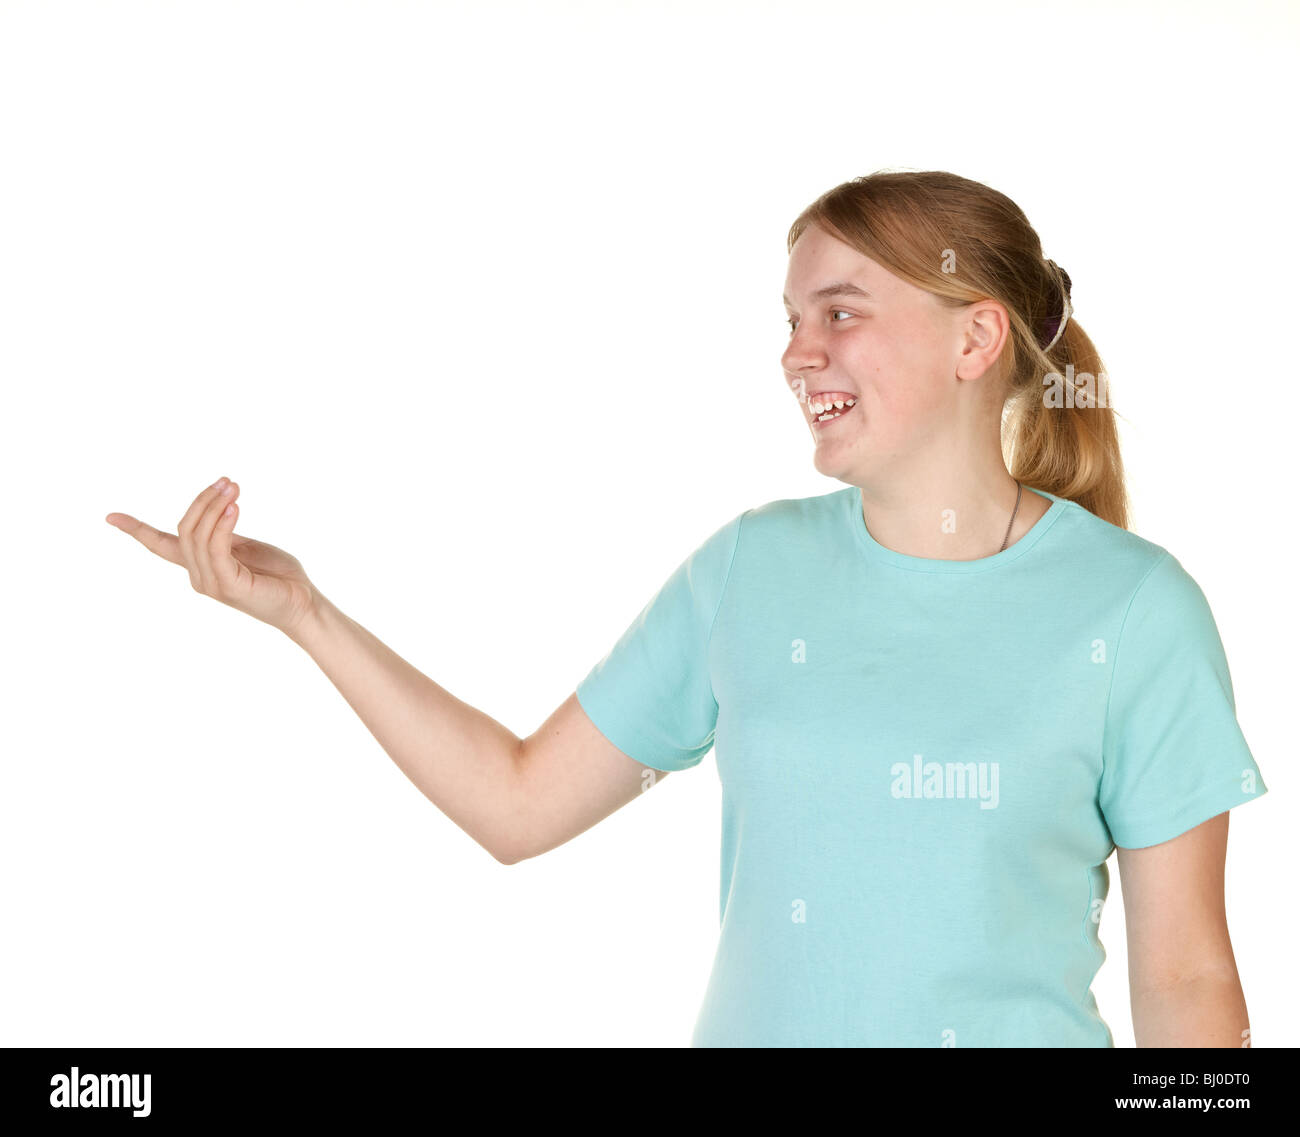 teenage girl gesturing and pointing to copyspace Stock Photo